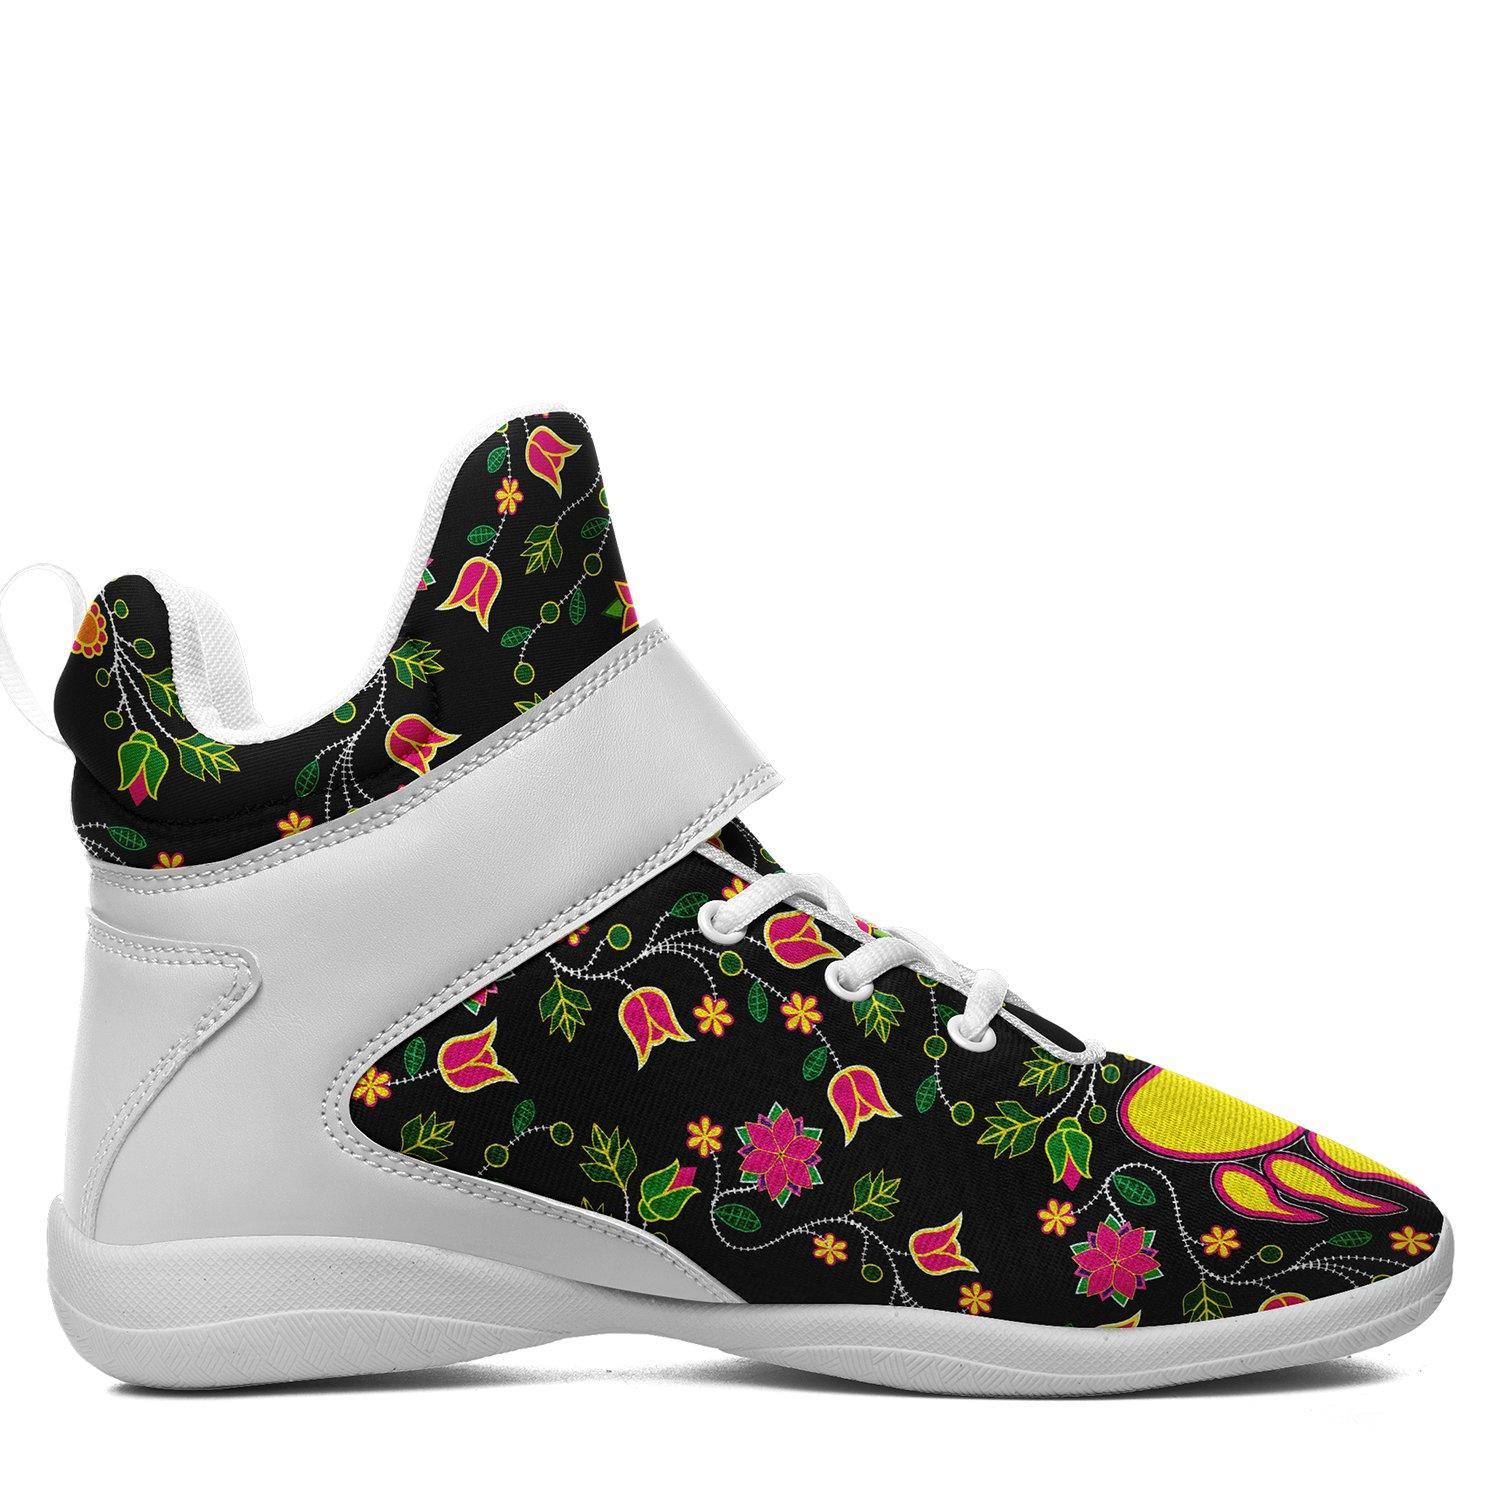 Floral Bearpaw Ipottaa Basketball / Sport High Top Shoes - White Sole 49 Dzine 